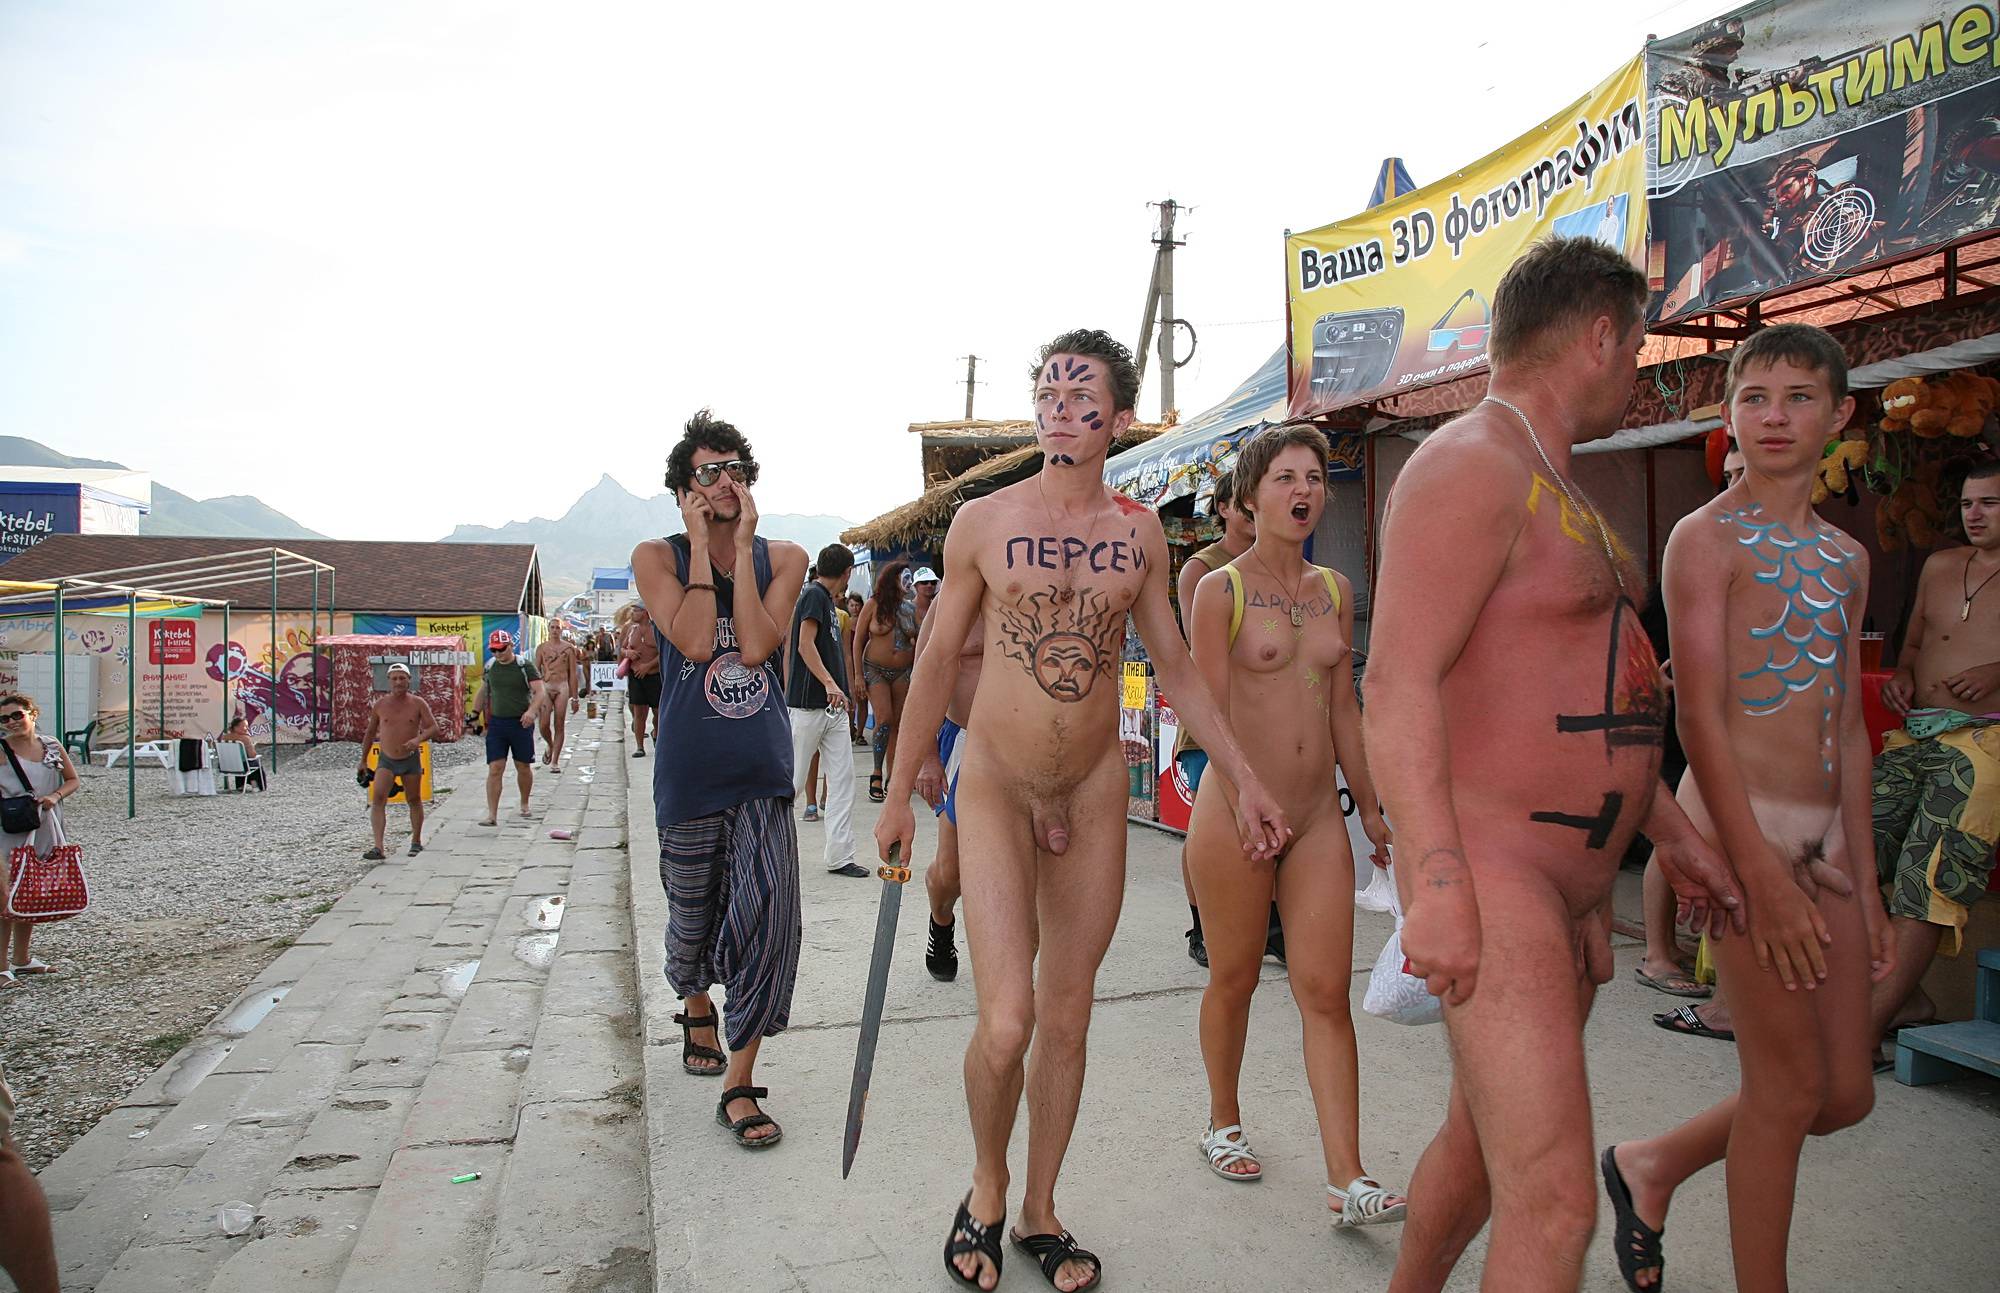 Pure Nudism-Marching Down The Street - 4